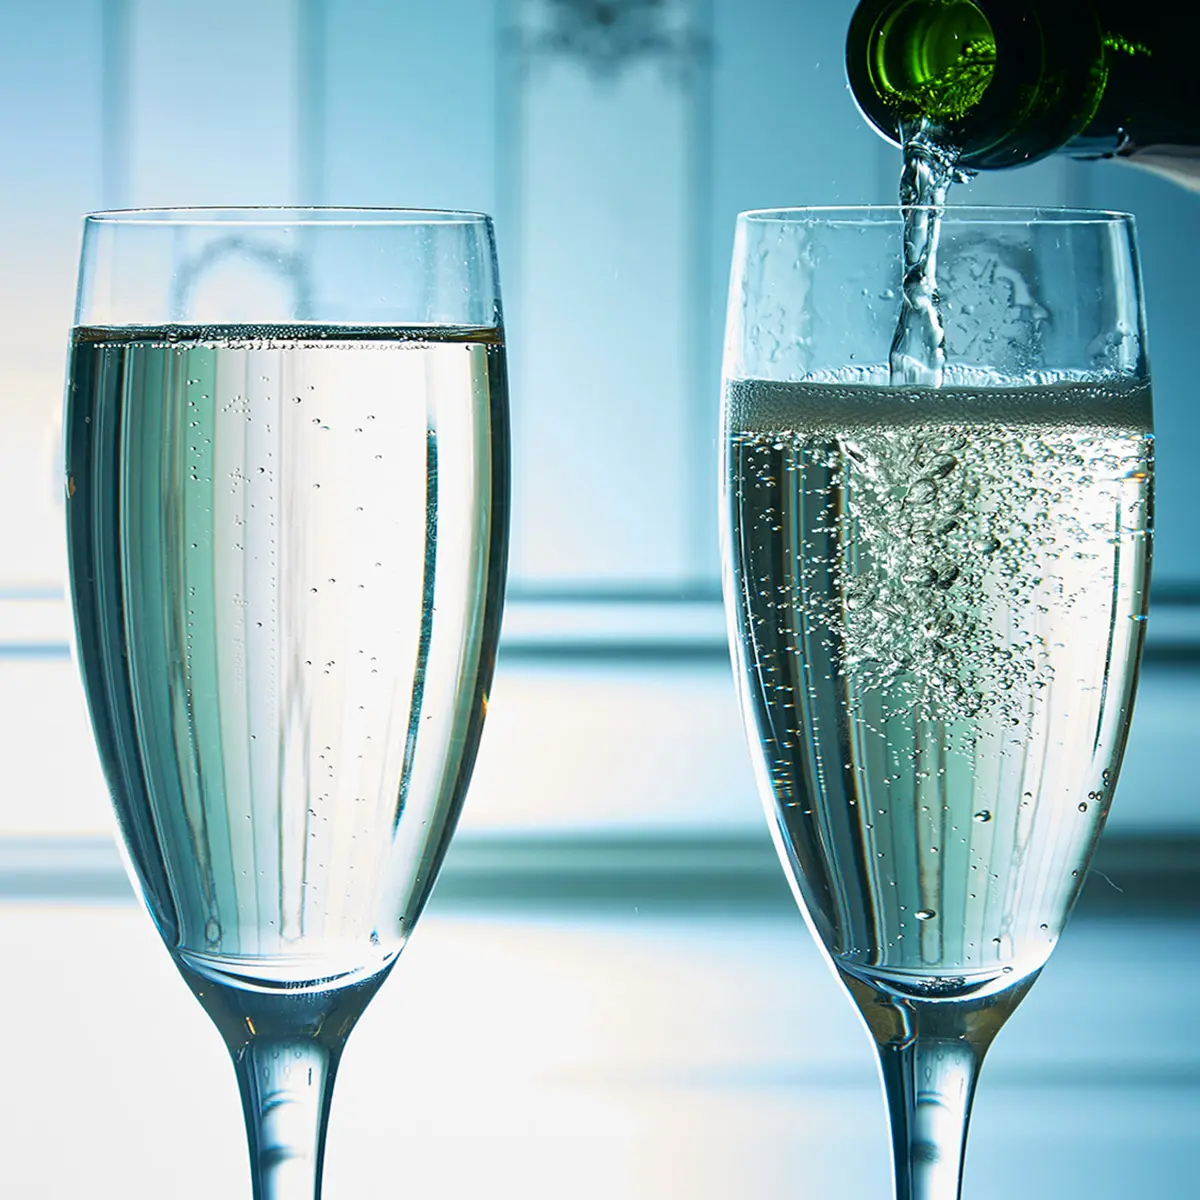 Champagne being poured into two glasses